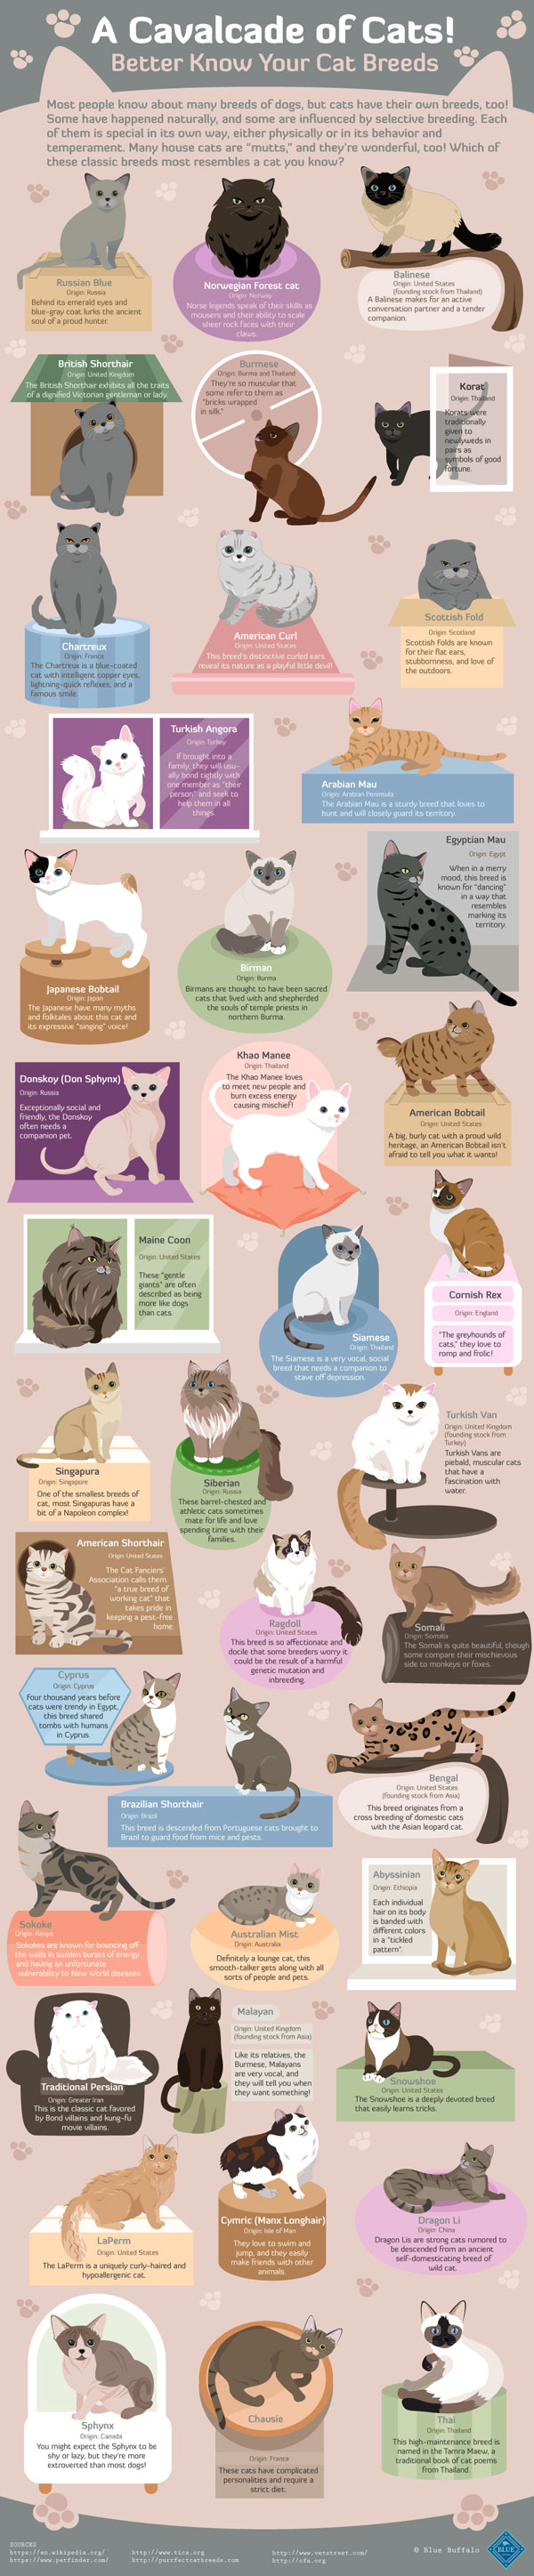 infographic-cavalcade-of-cats